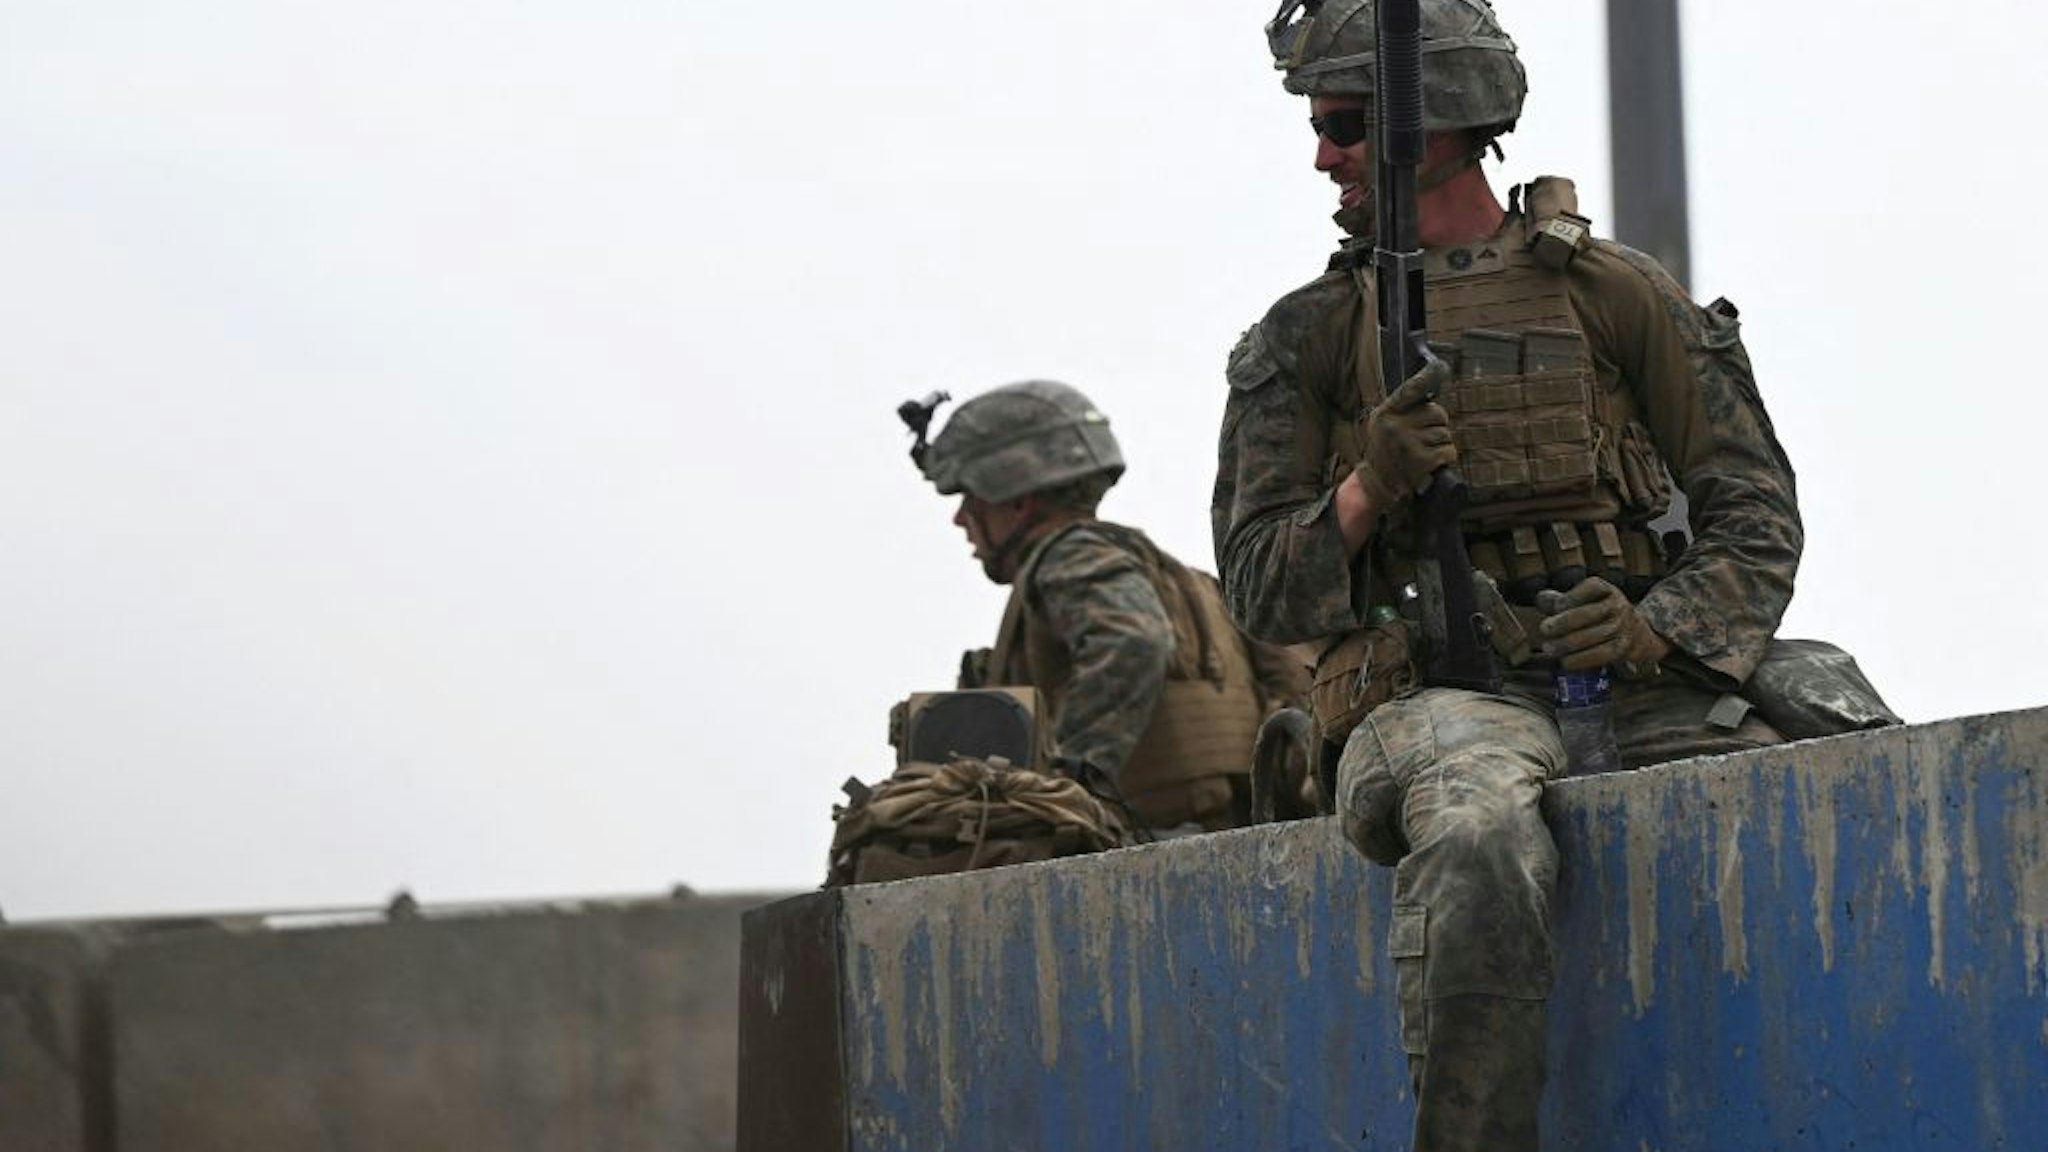 US soldiers sit on a wall as Afghans gather on a roadside near the military part of the airport in Kabul on August 20, 2021, hoping to flee from the country after the Taliban's military takeover of Afghanistan. (Photo by Wakil KOHSAR / AFP) (Photo by WAKIL KOHSAR/AFP via Getty Images)